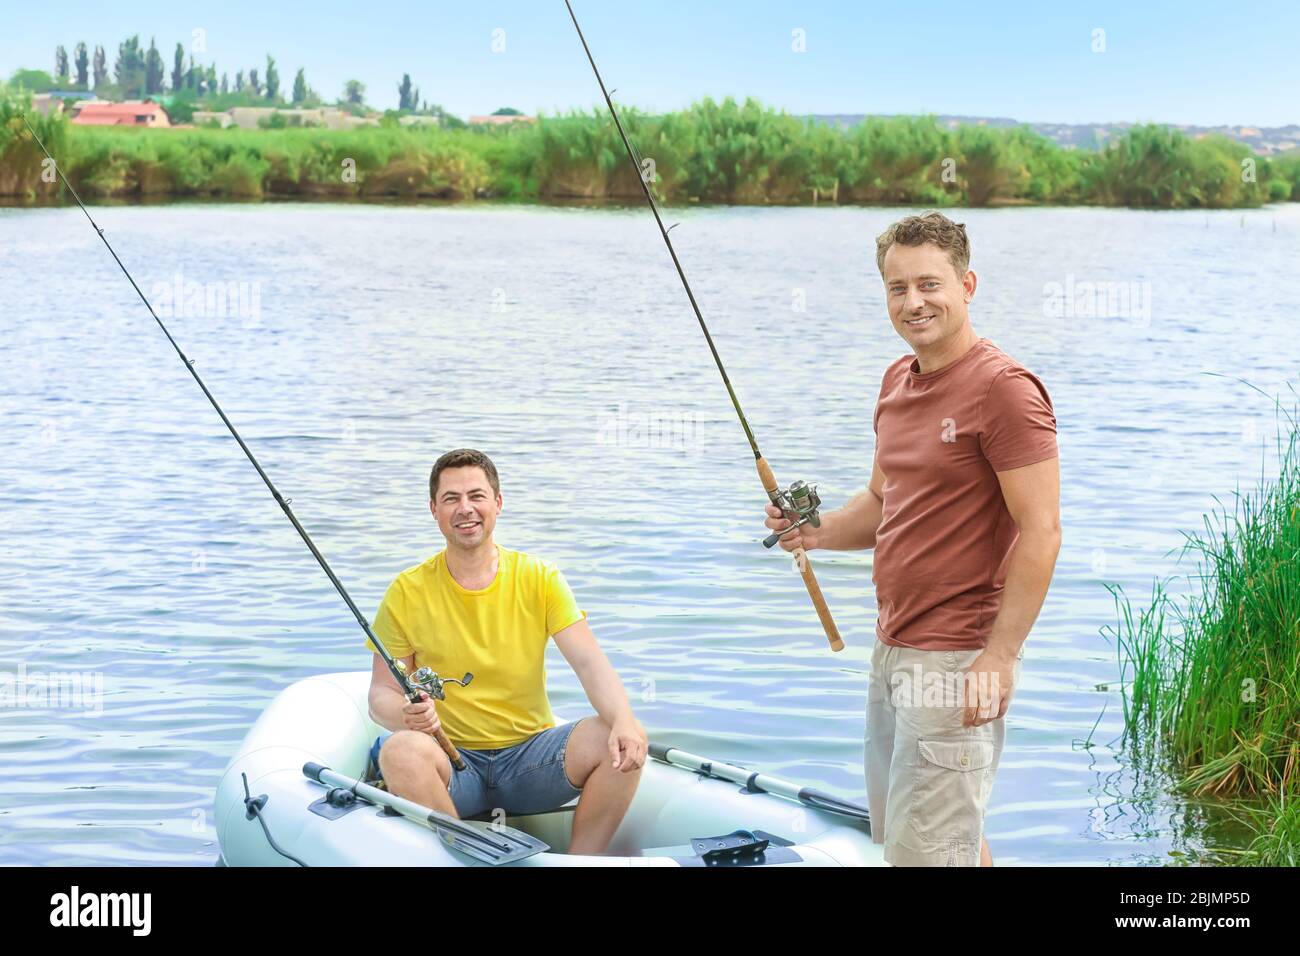 Two men fishing from inflatable boat on river Stock Photo - Alamy